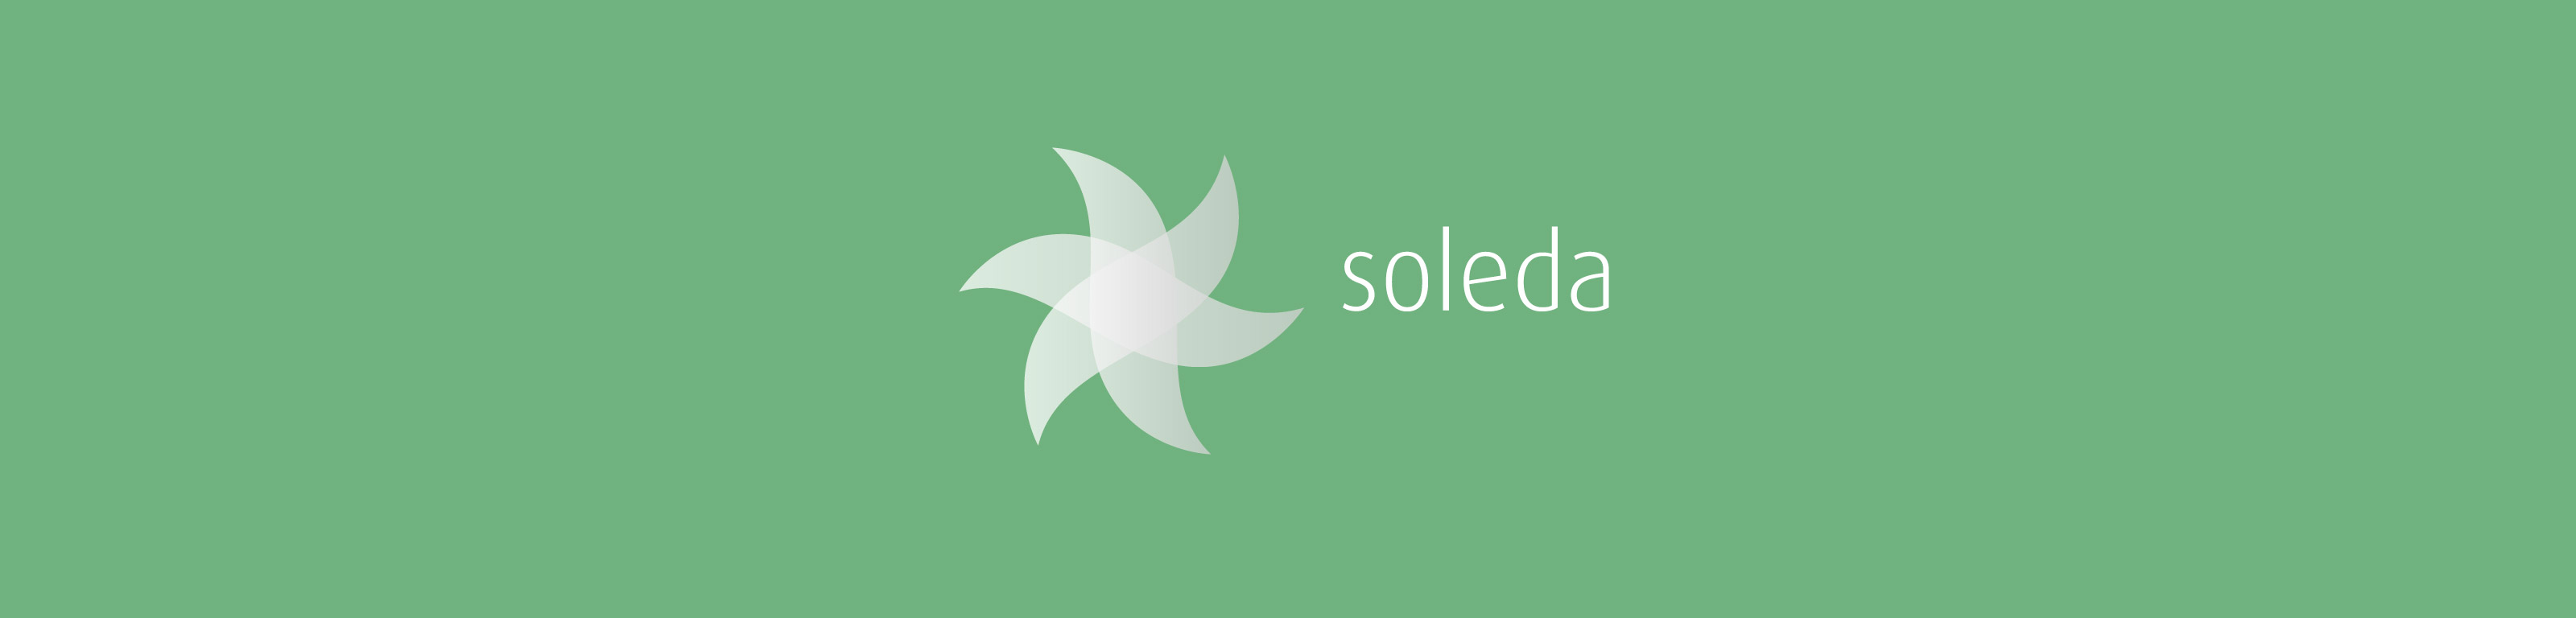 Soleda logo in white with green background